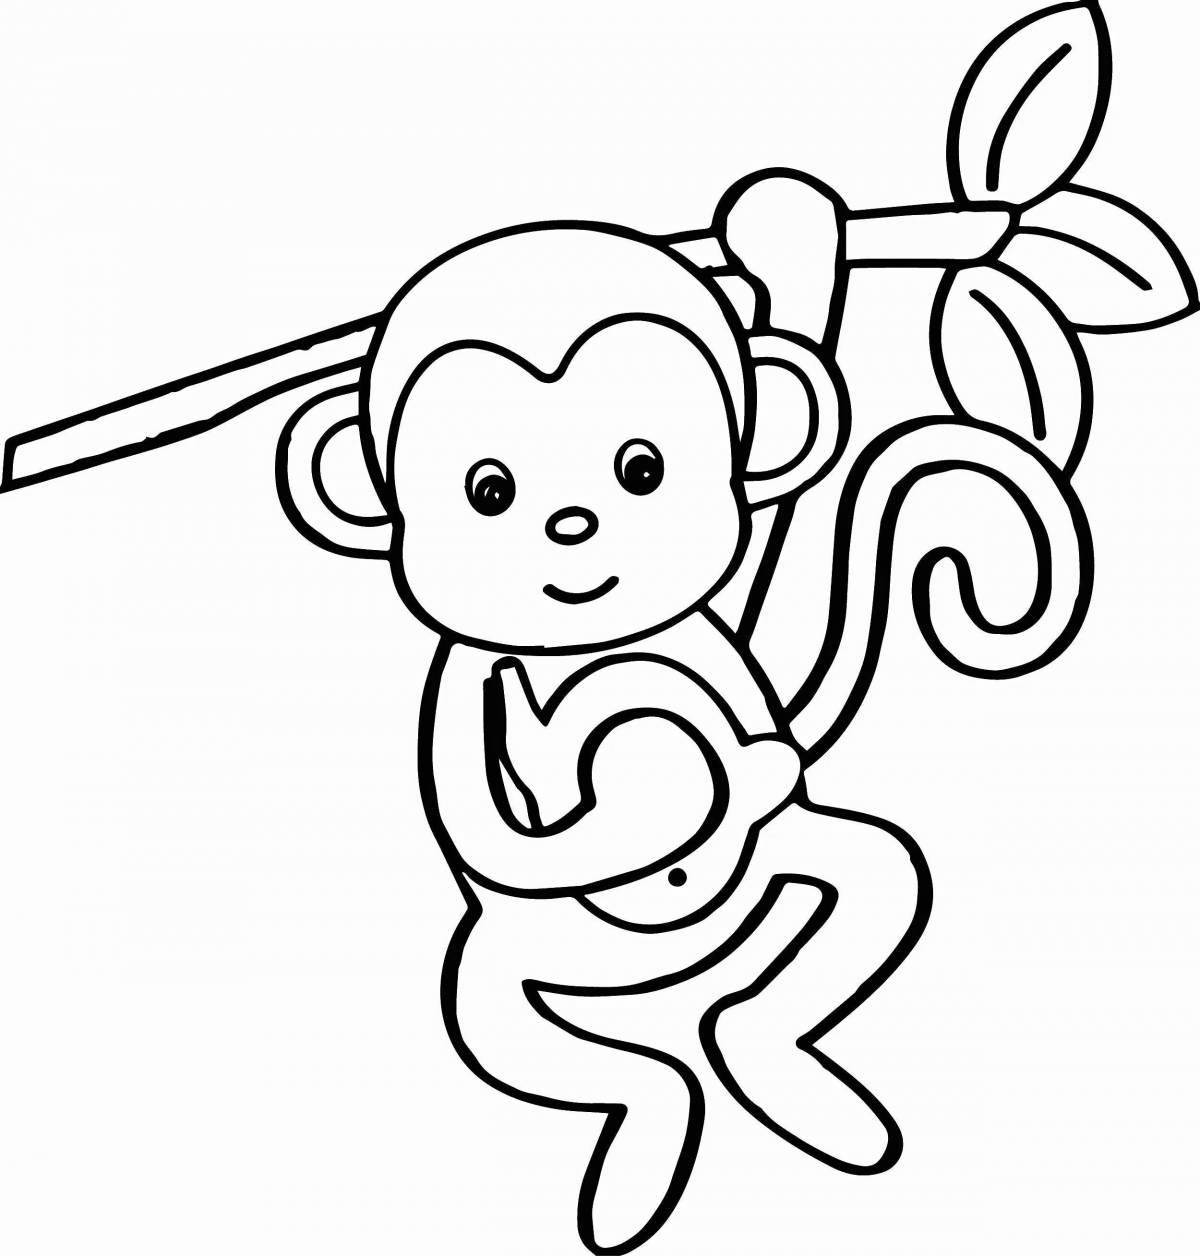 Bright coloring monkey